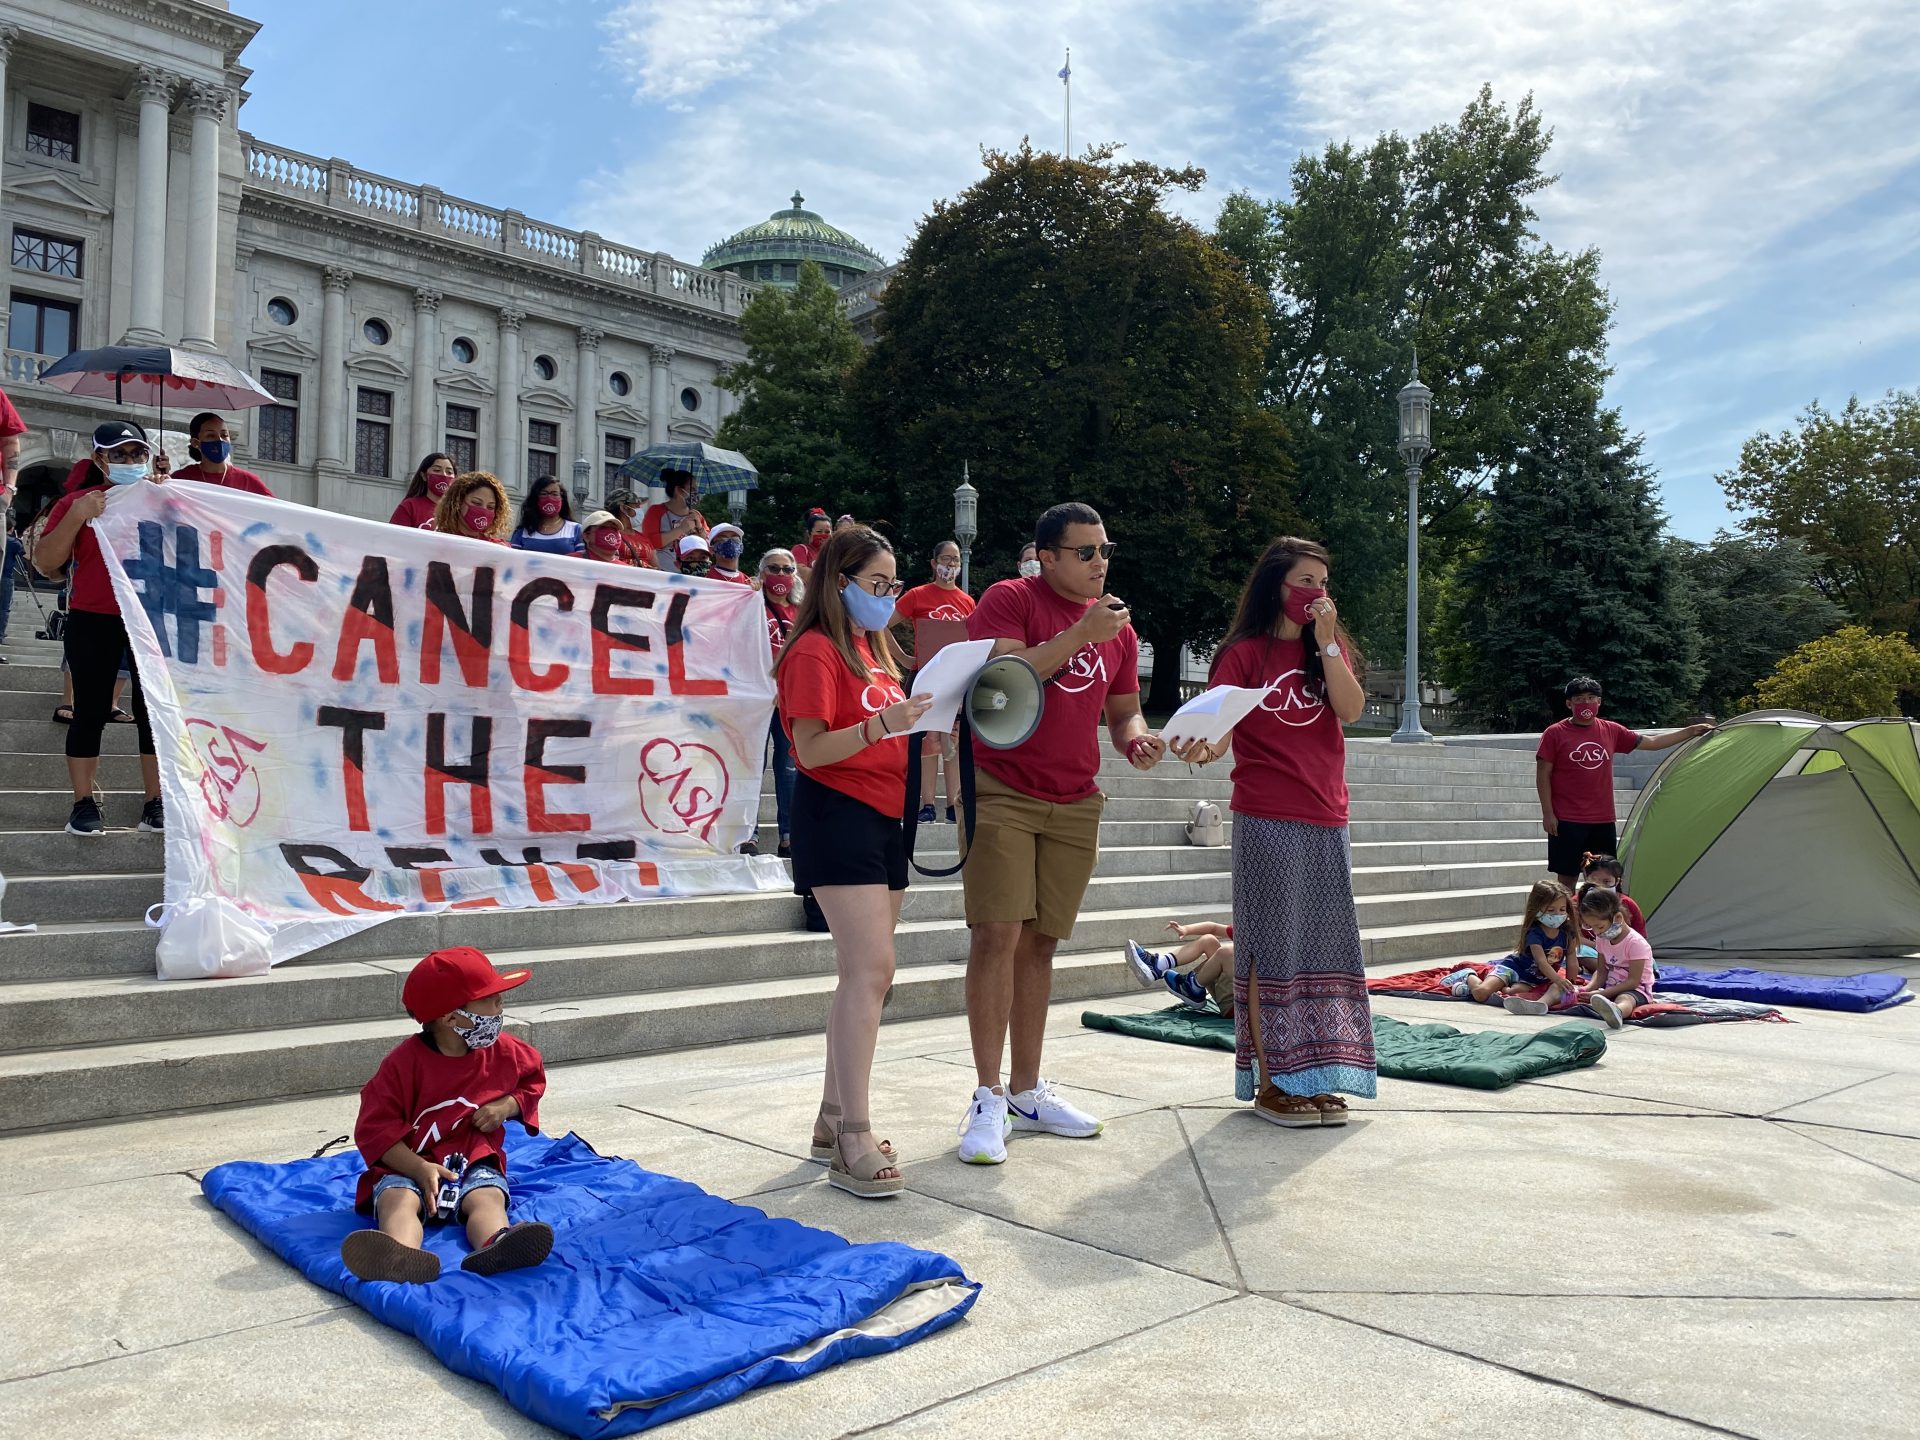 Immigrant advocacy group CASA demonstrated on the steps of the Capitol building in Harrisburg on Aug. 26, 2020.